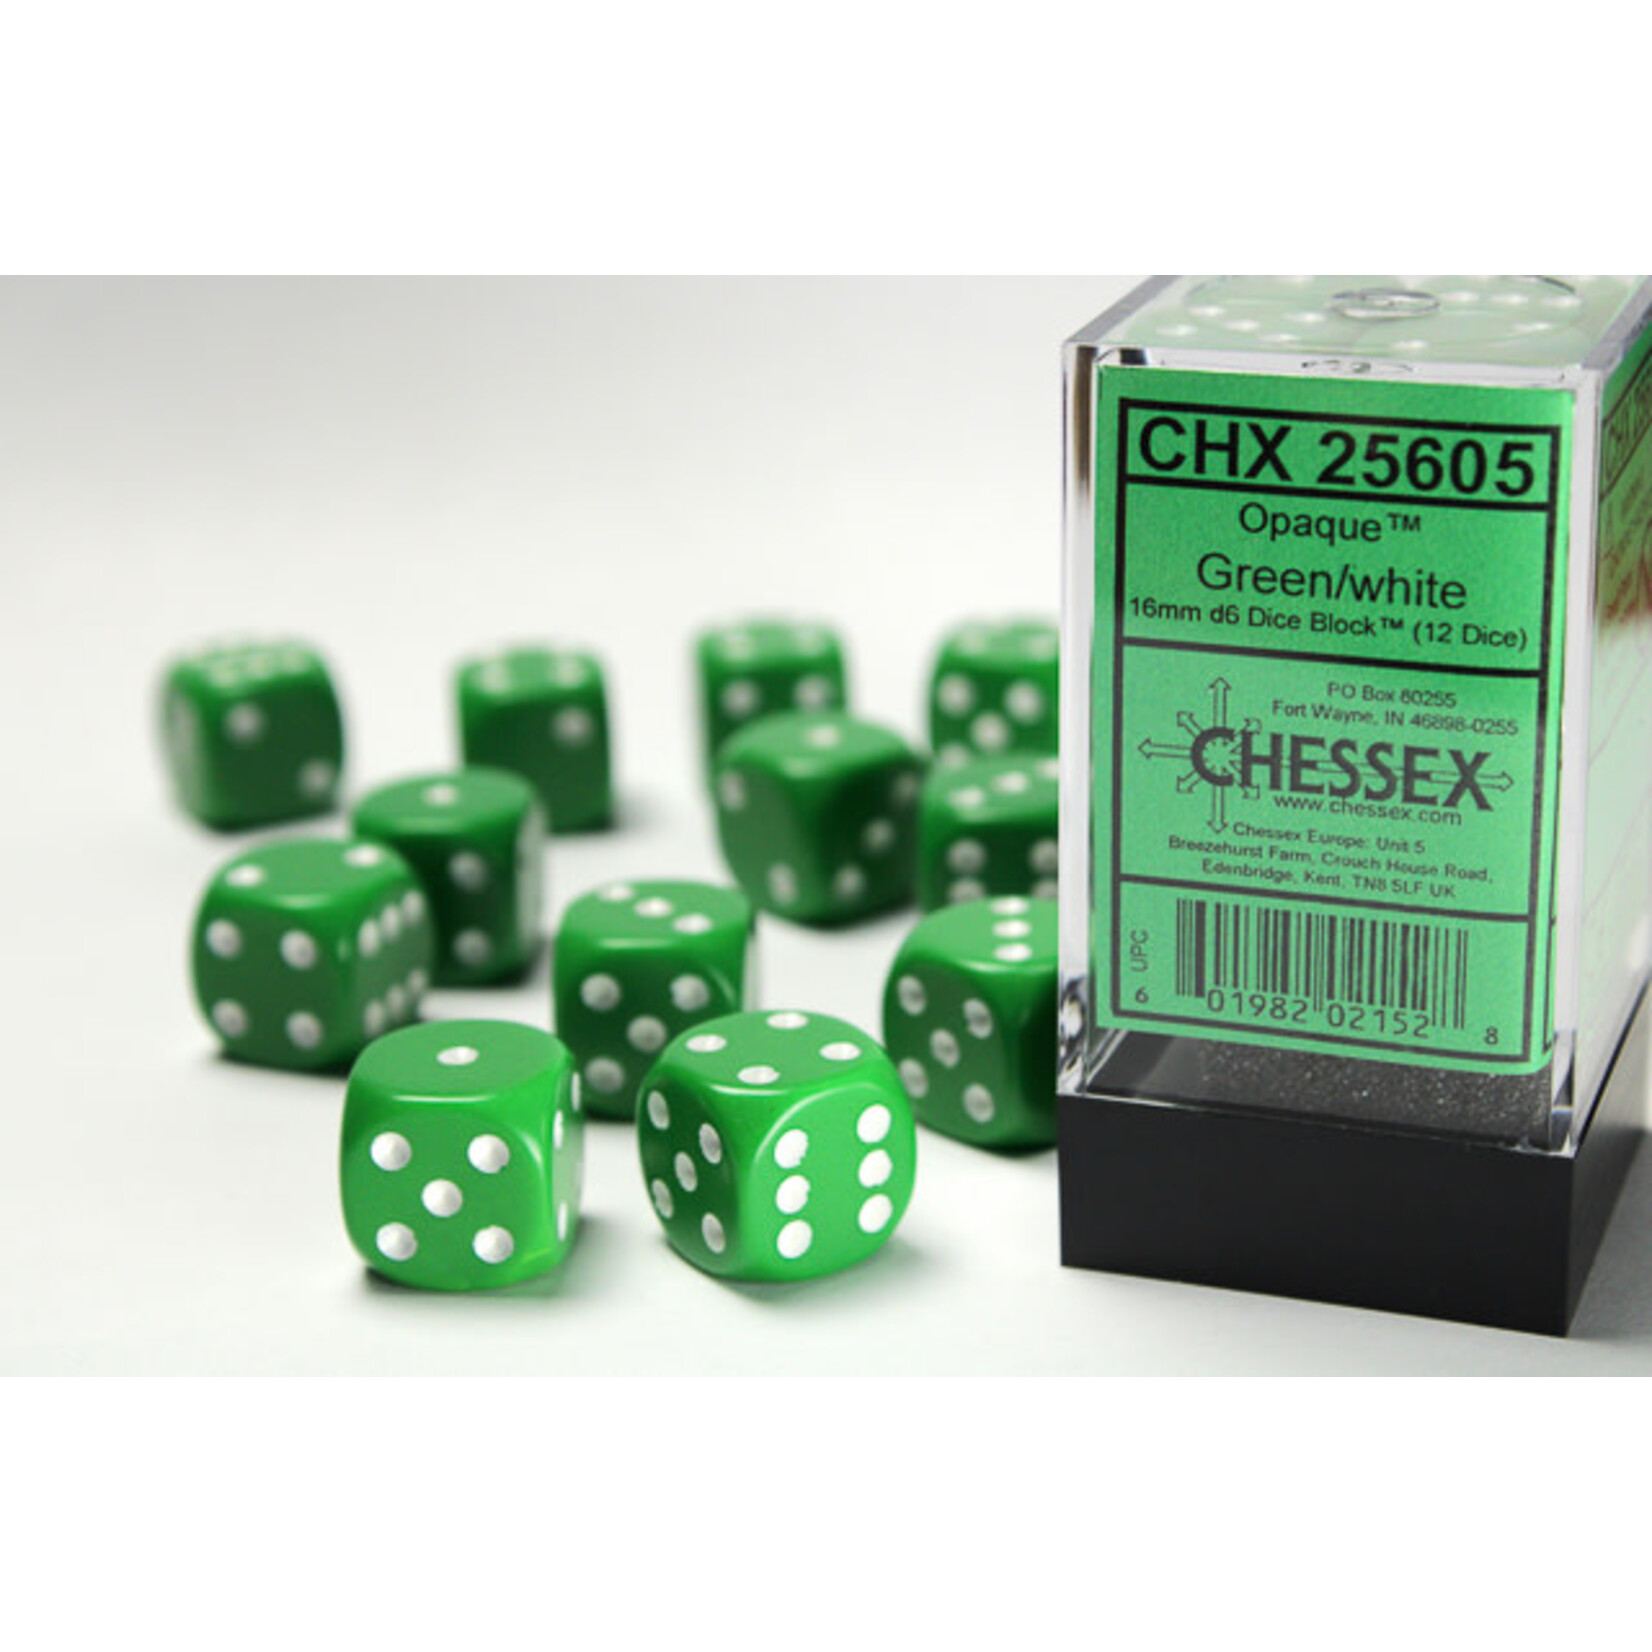 Chessex Opaque Green/white 16mm d6 Dice Block (12 dice)